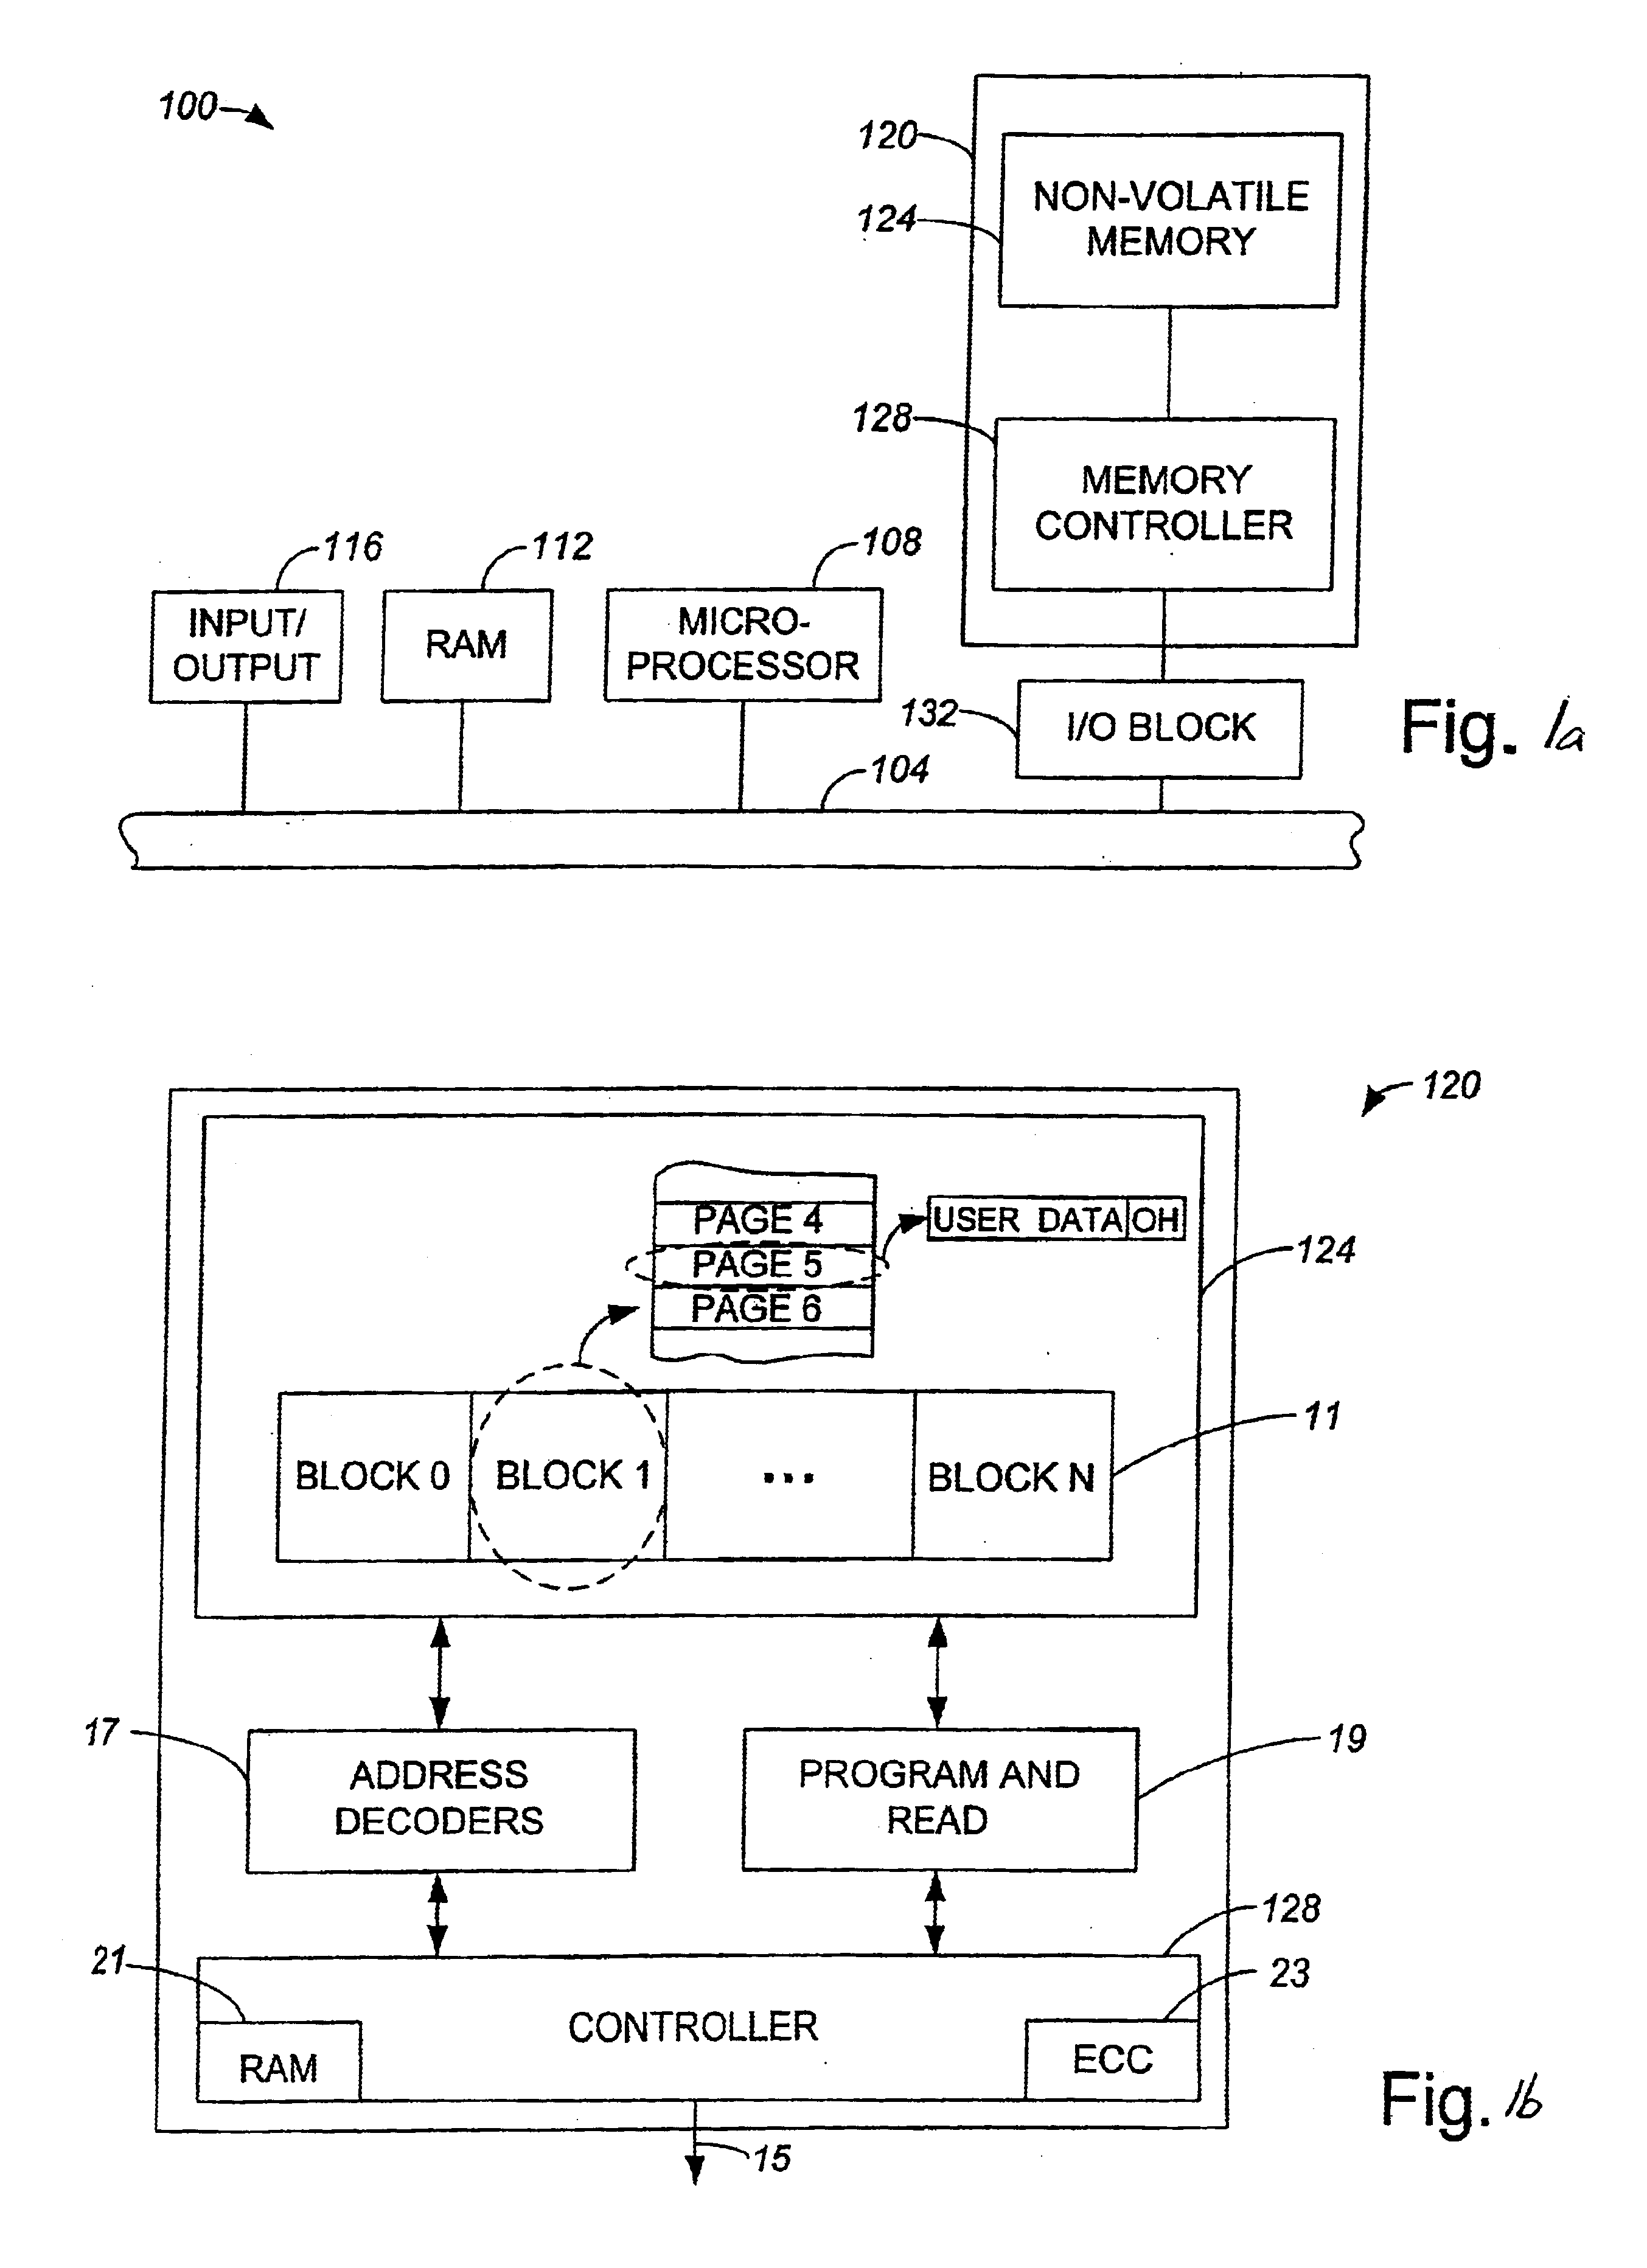 Efficient read, write methods for multi-state memory